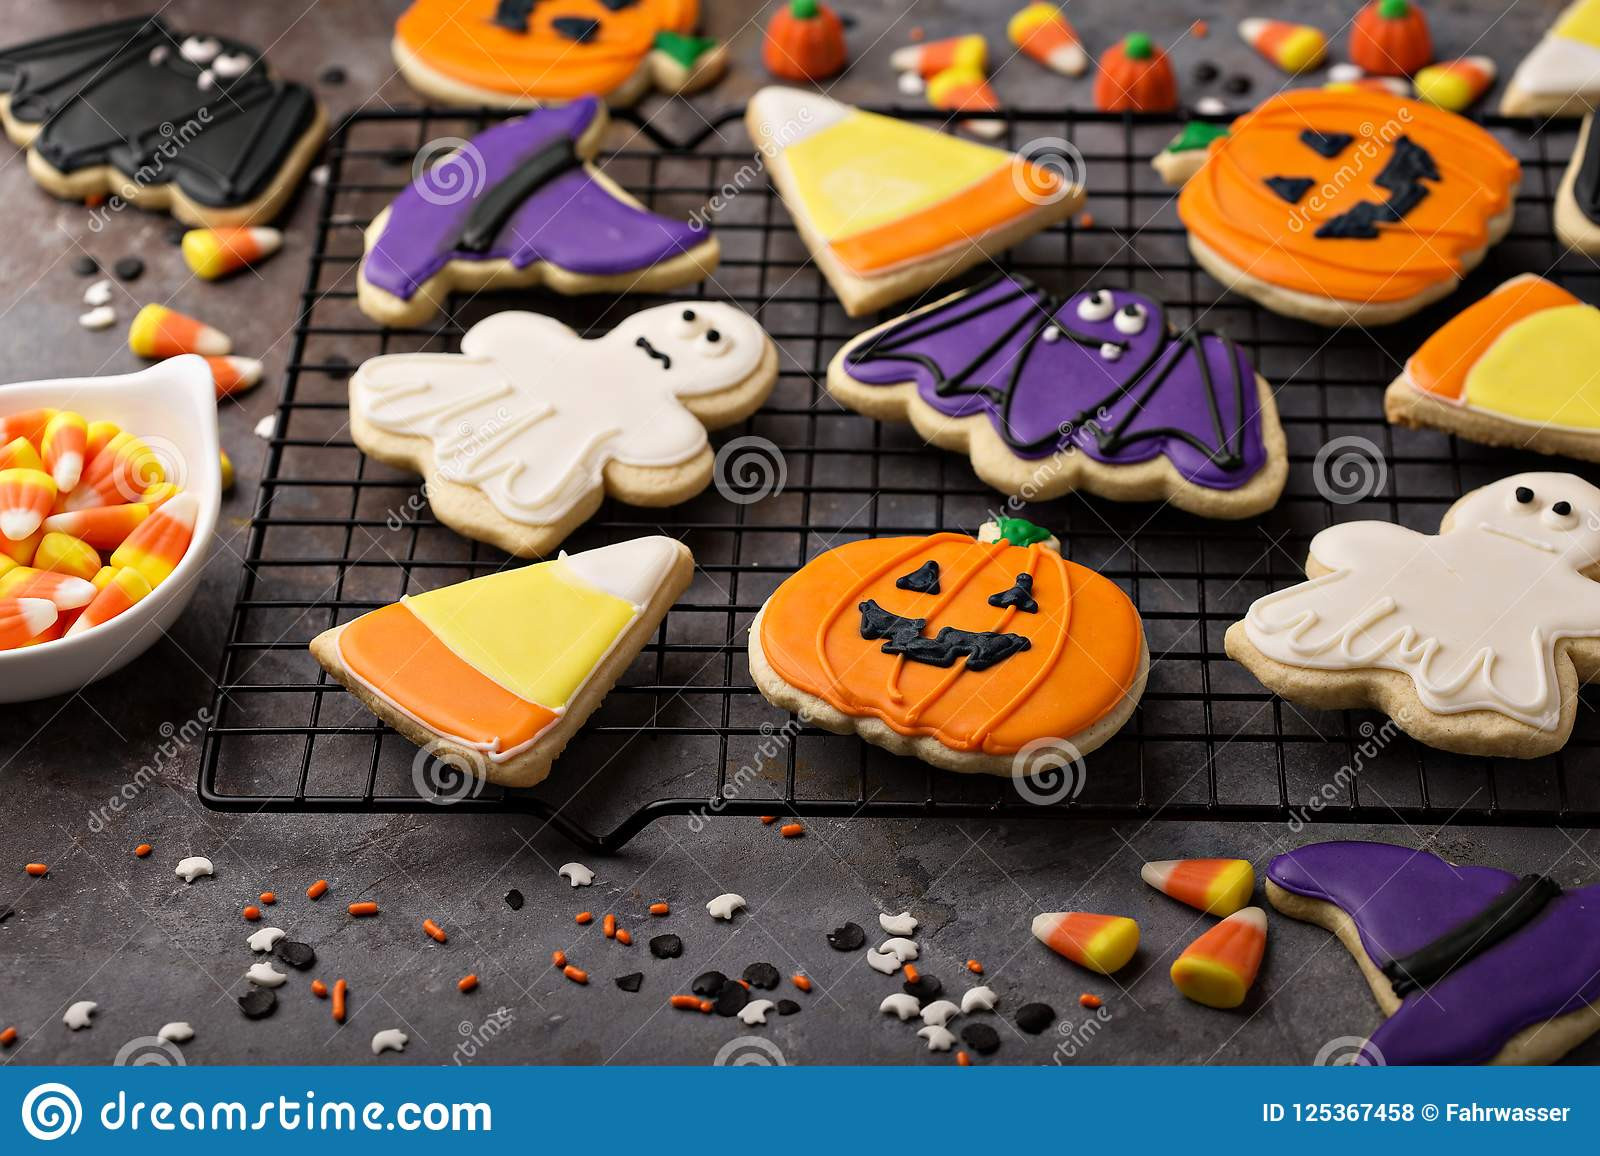 Halloween Cookies Royal Icing
 Halloween Cookies Decorated With Royal Icing Stock